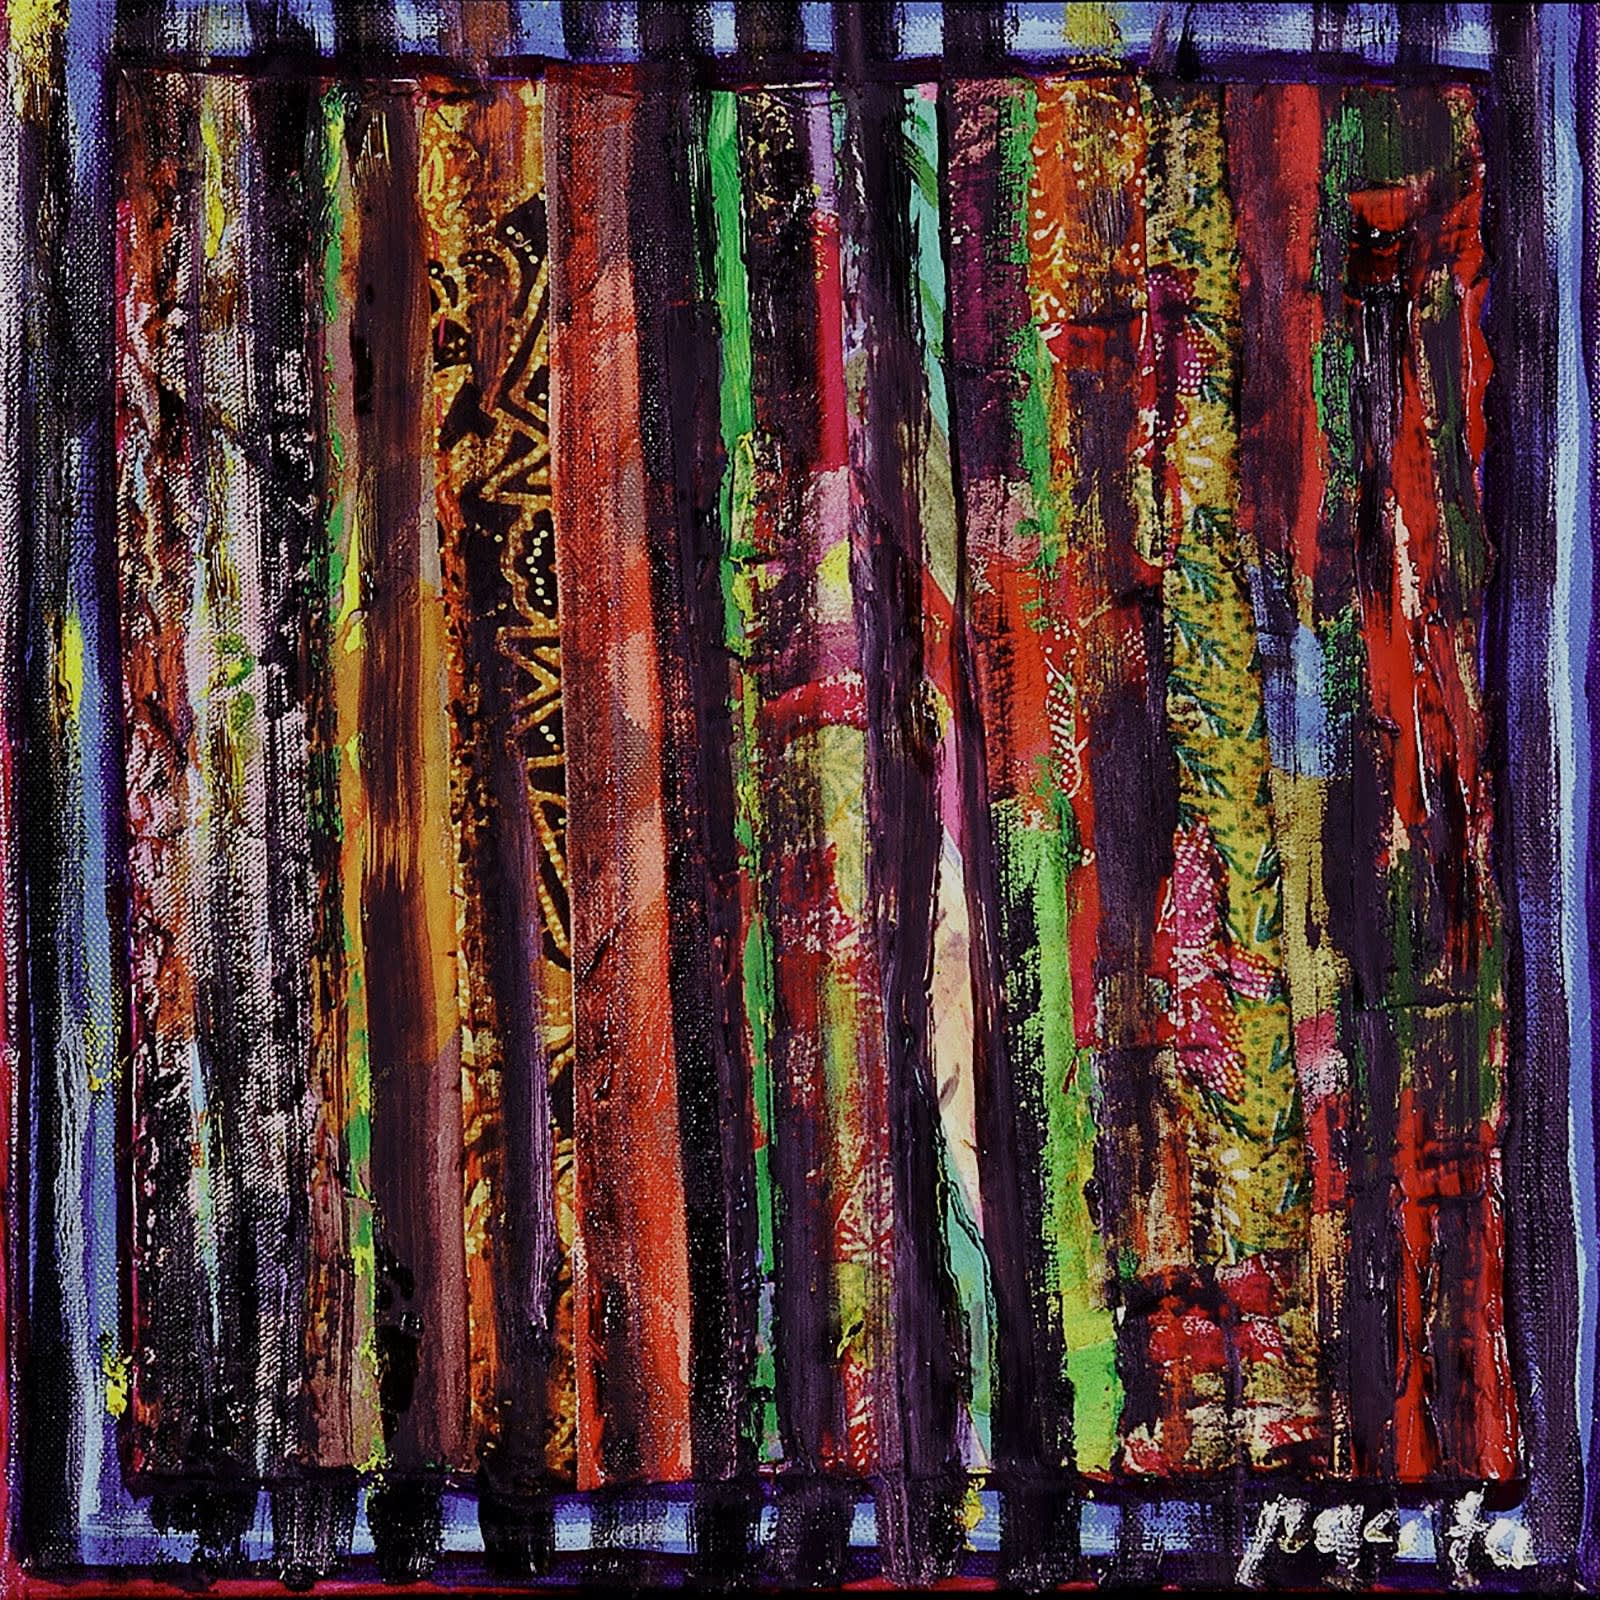 Shifting daylight, 1998 Oil, painted batik cloth stitched on canvas 12 x 12 in 30 x 30 cm